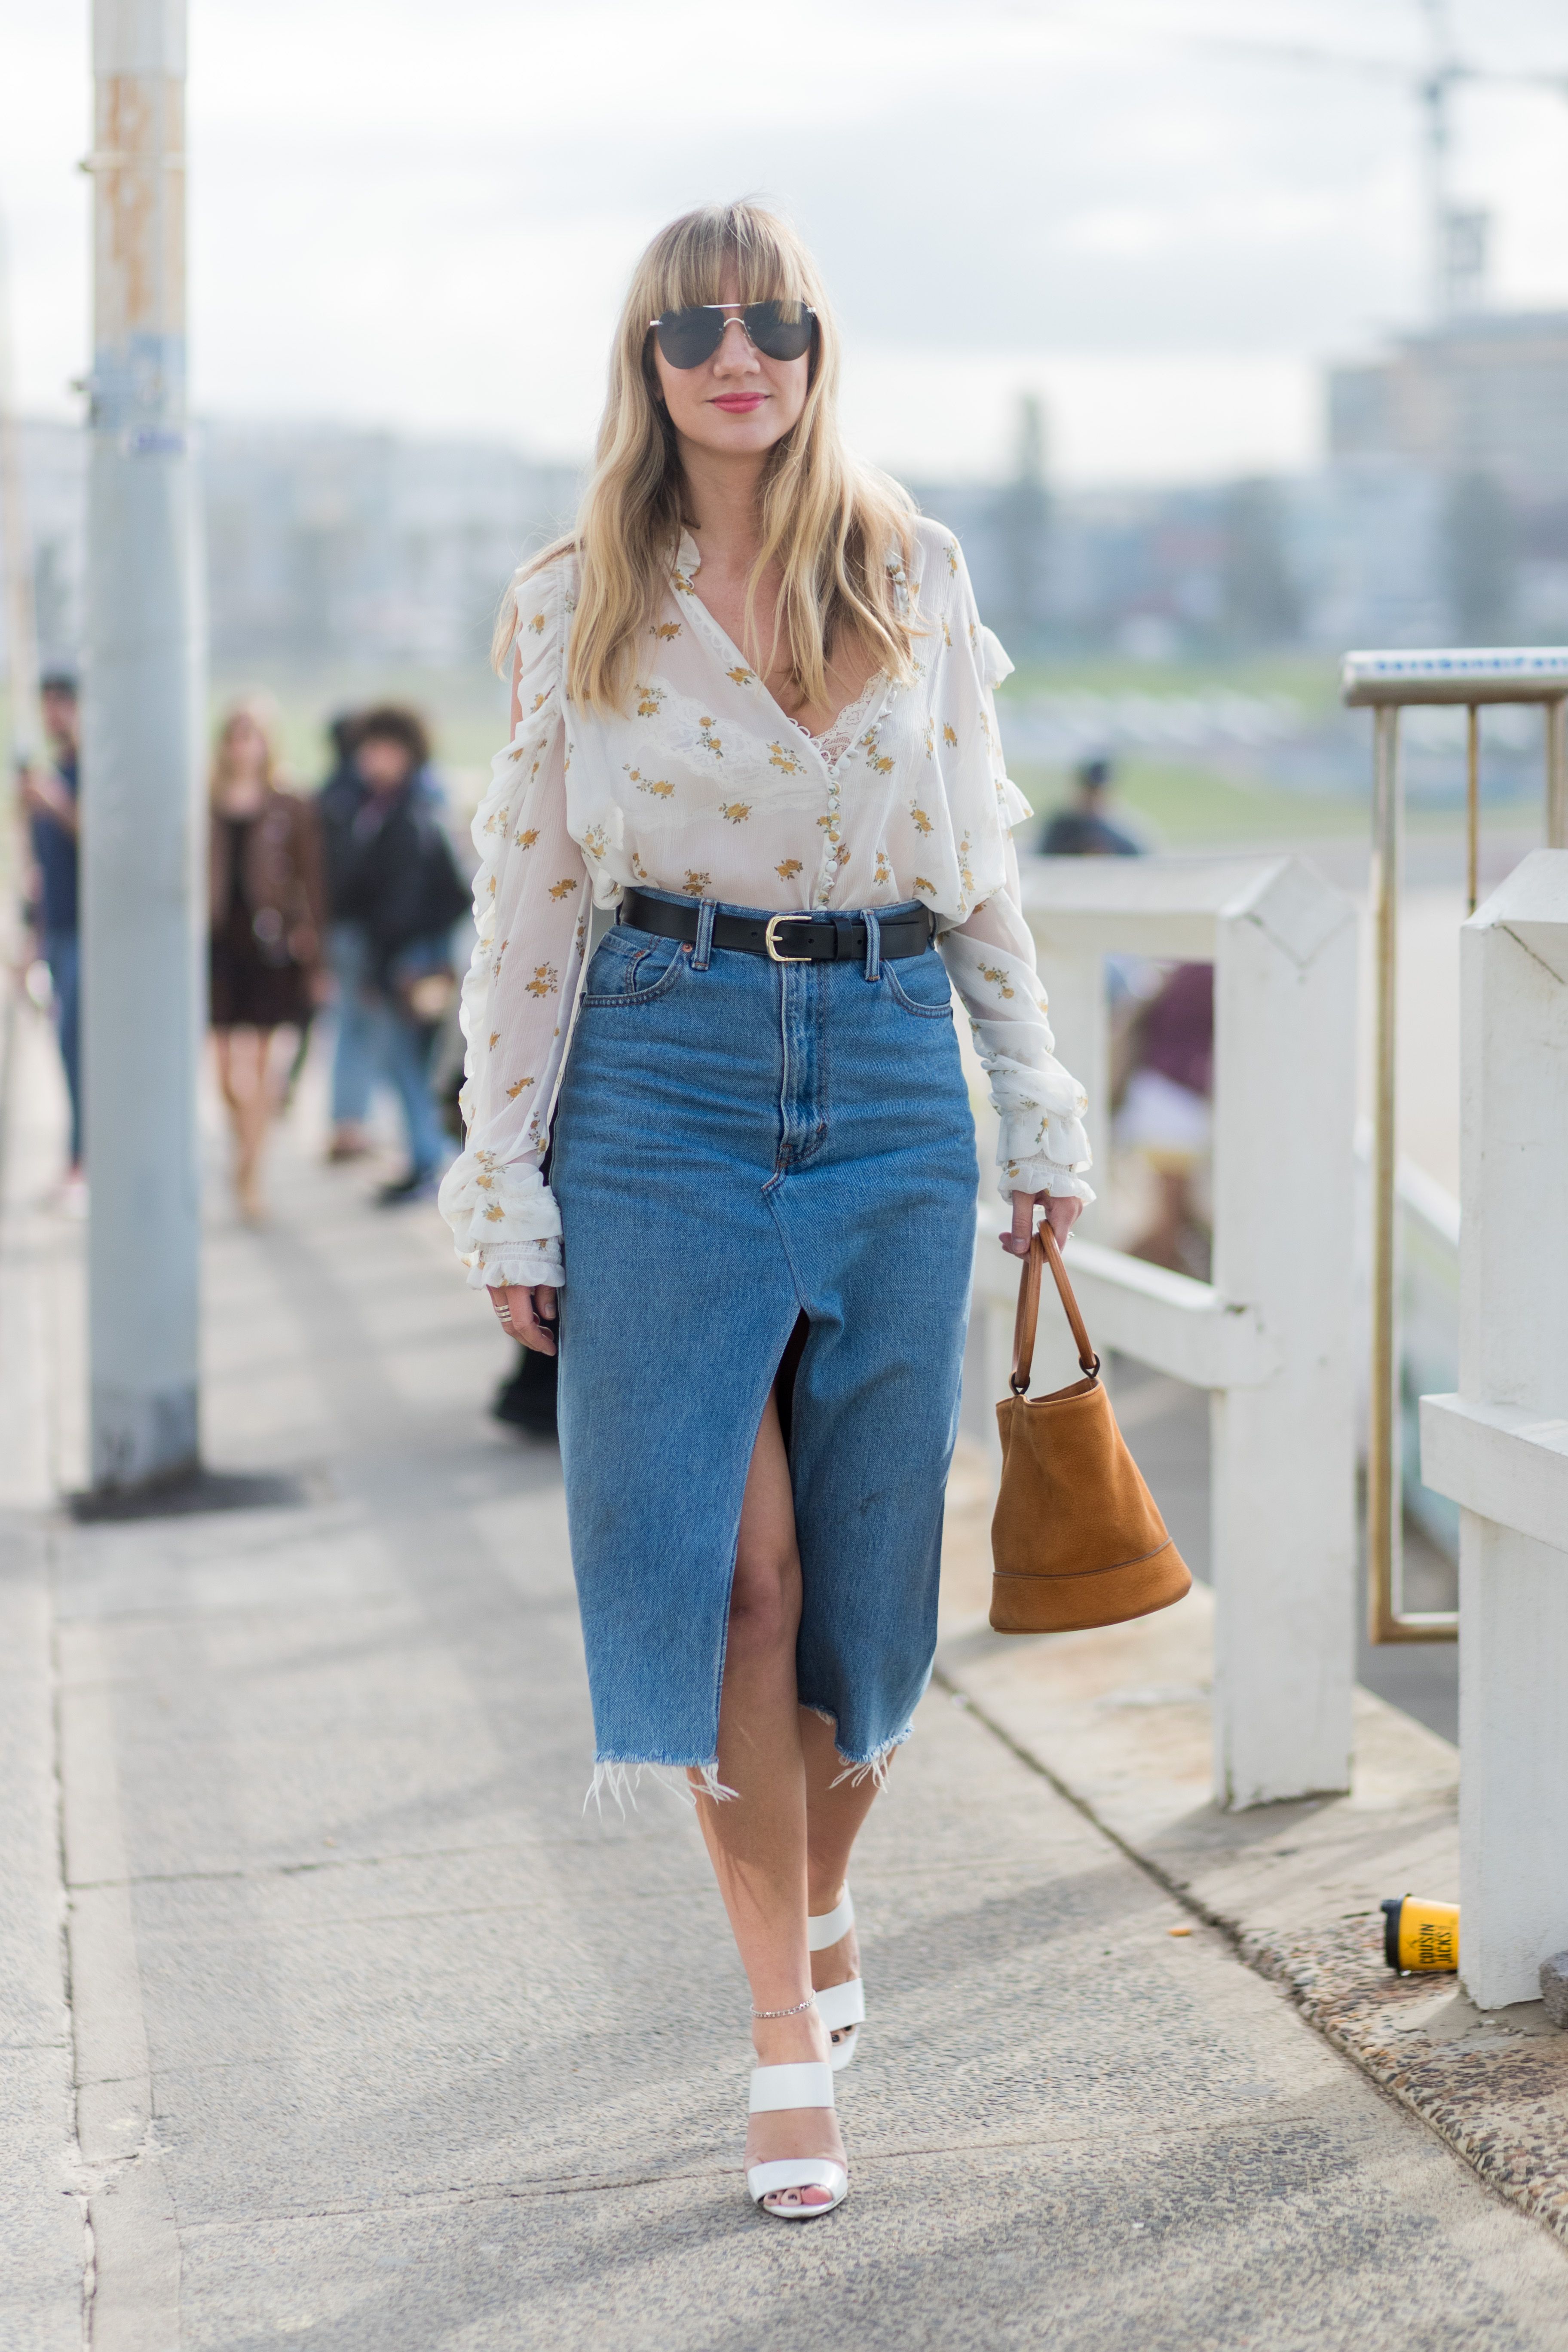 Summer Wind: Wear to Work Outfit Inspiration